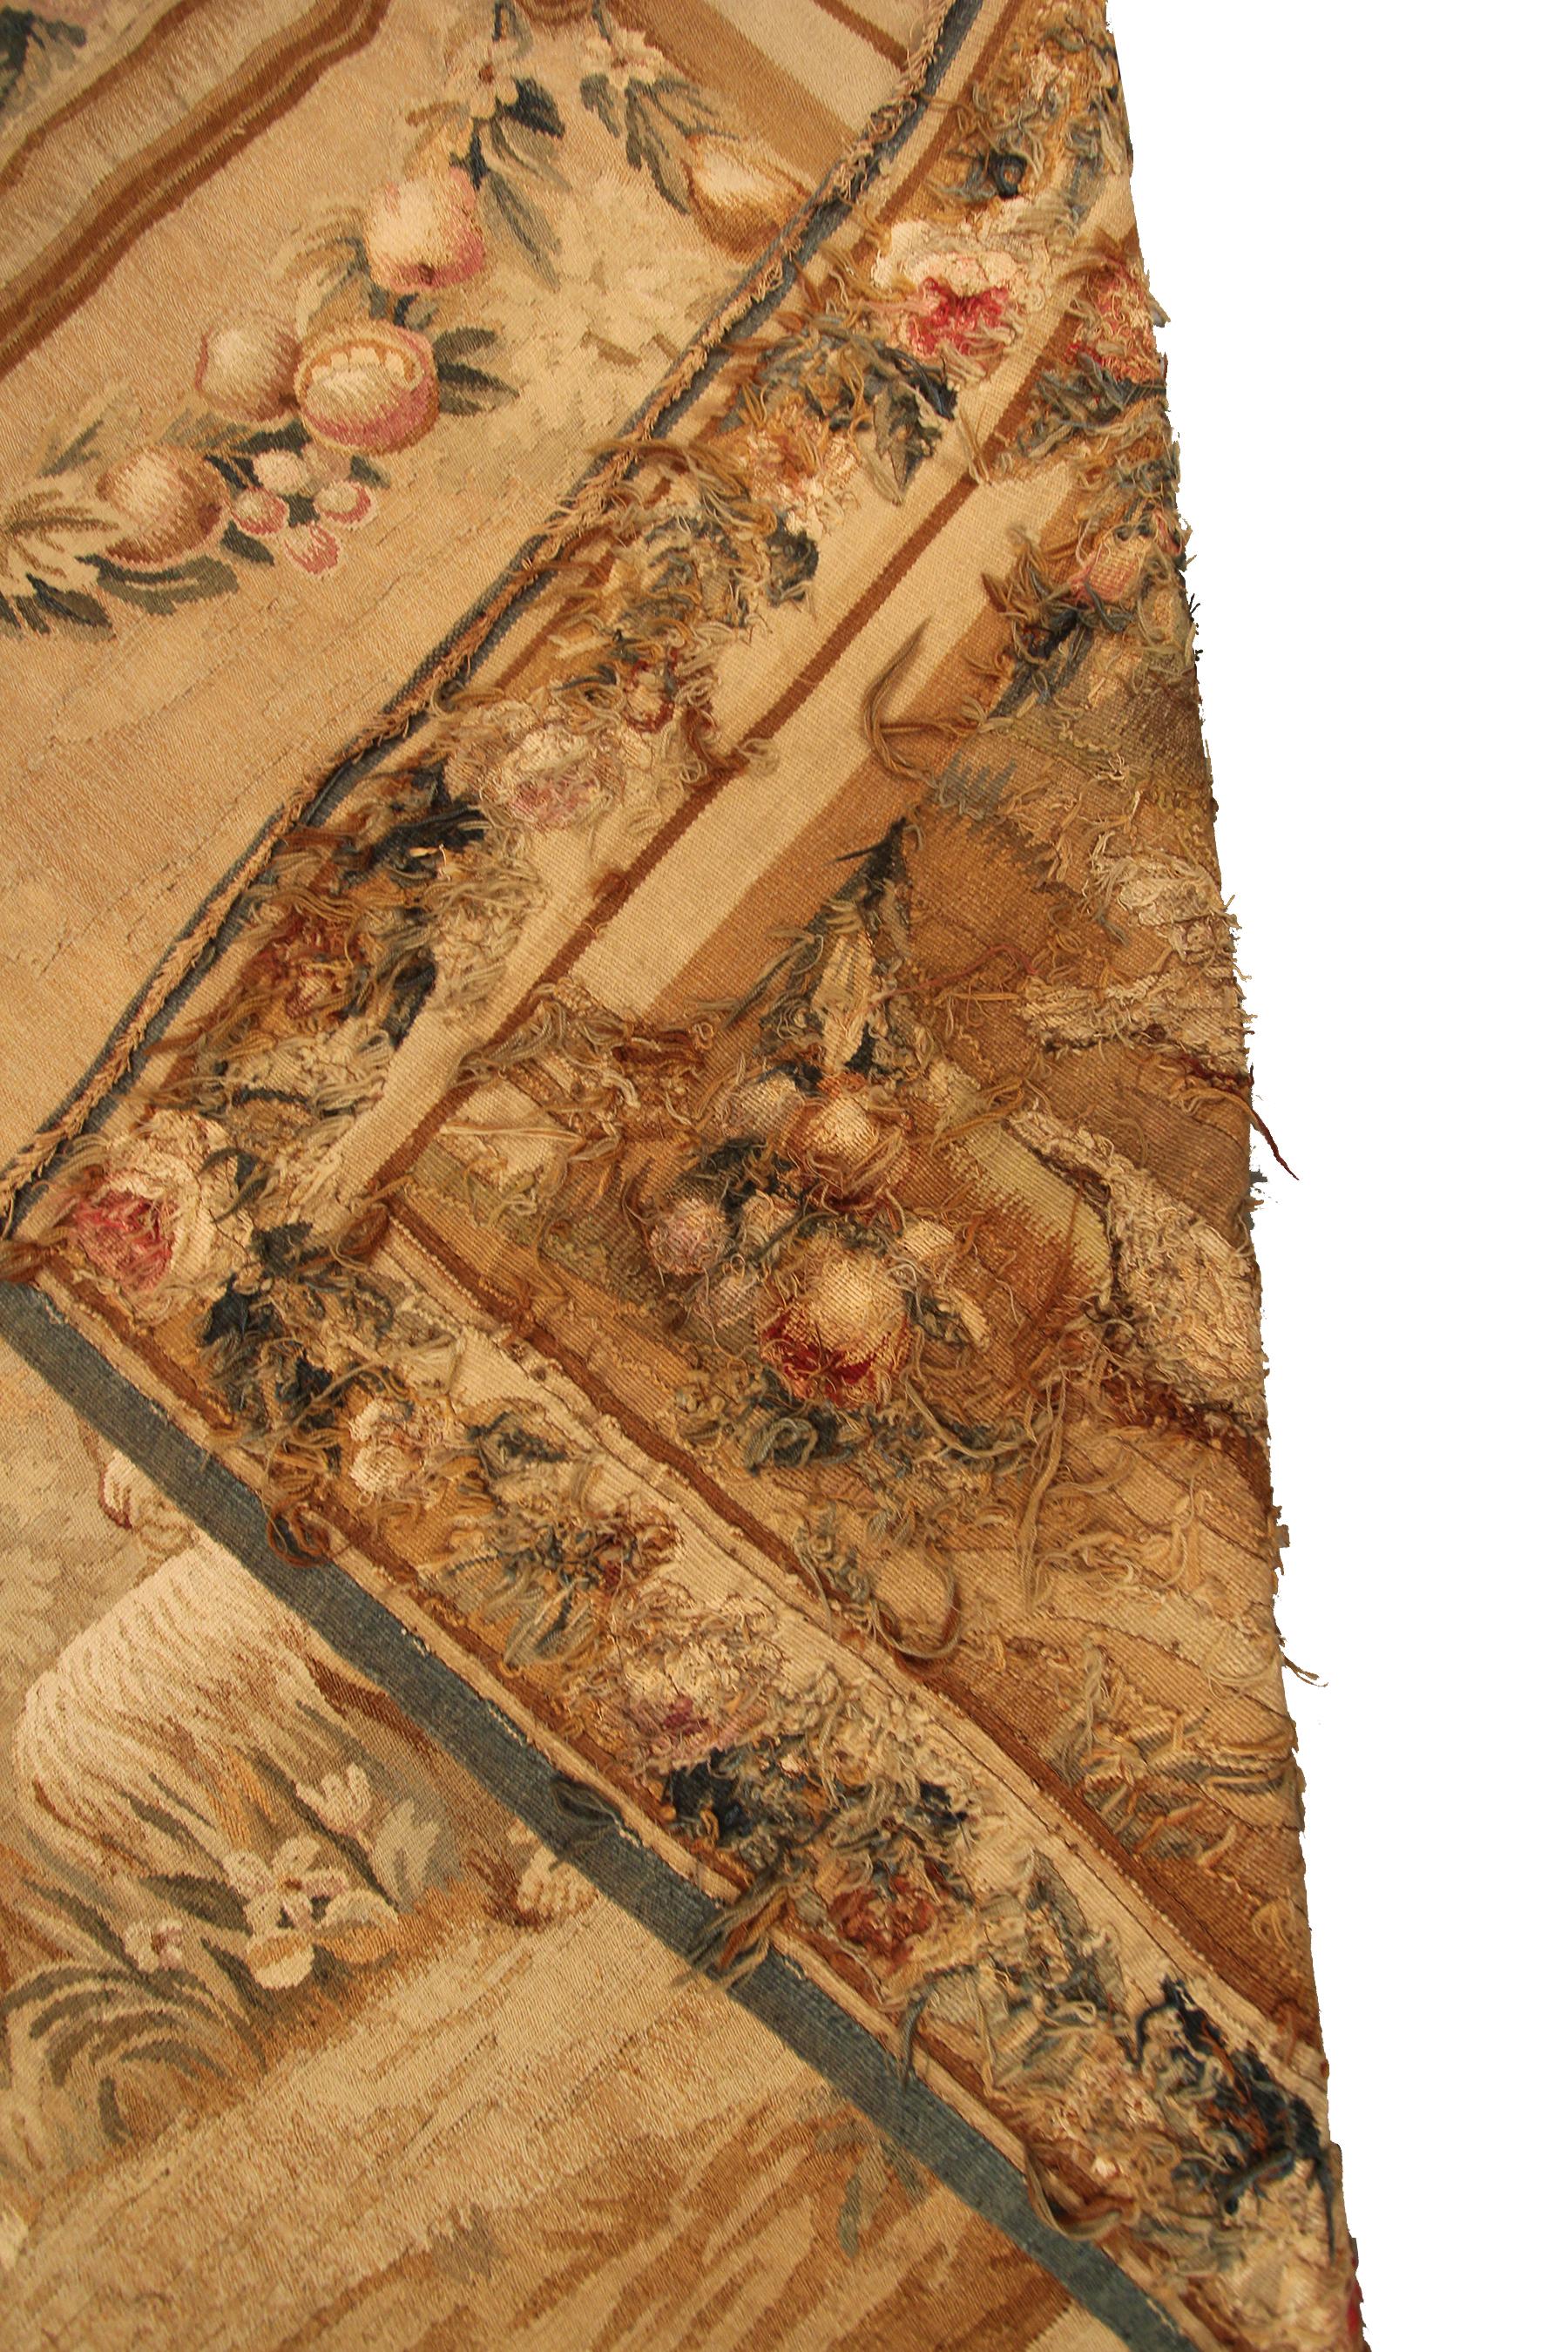 Antique French Tapestry Handwoven French Tapestry Aubusson Tapestry For Sale 1